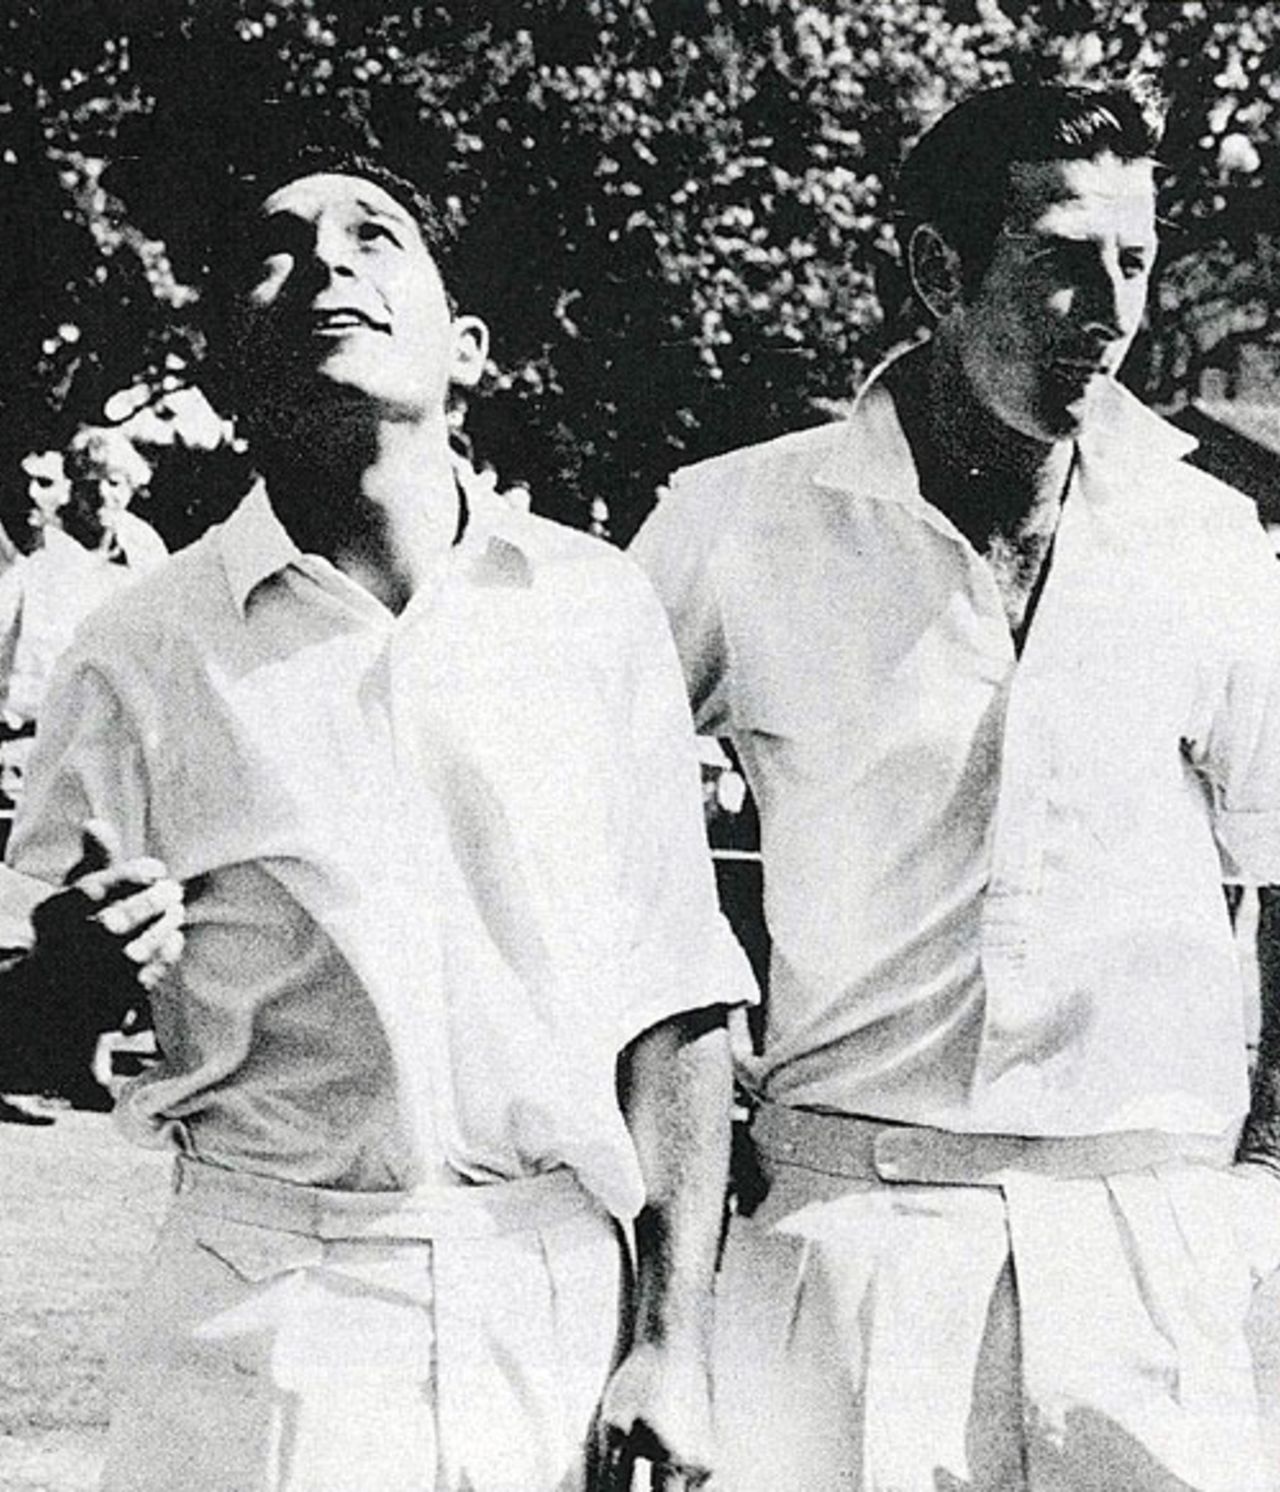 Ali Bacher and Bill Lawry toss at the start of the 3rd Test, South Africa v Australia, 3rd Test, Johannesburg, February 19, 1970